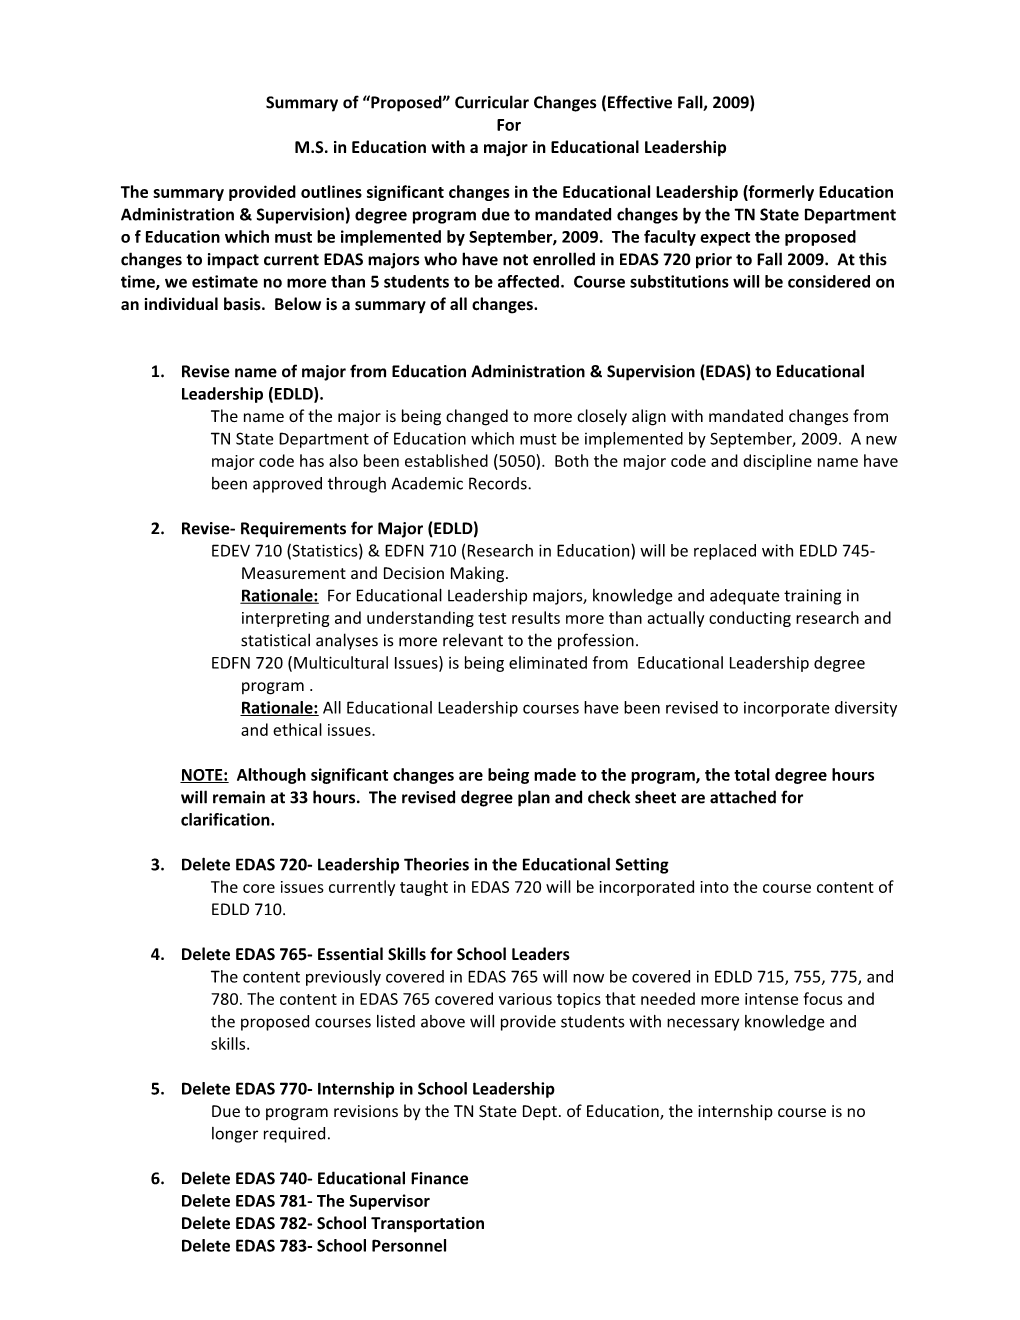 Summary of Proposed Curricular Changes (Effective Fall, 2009)